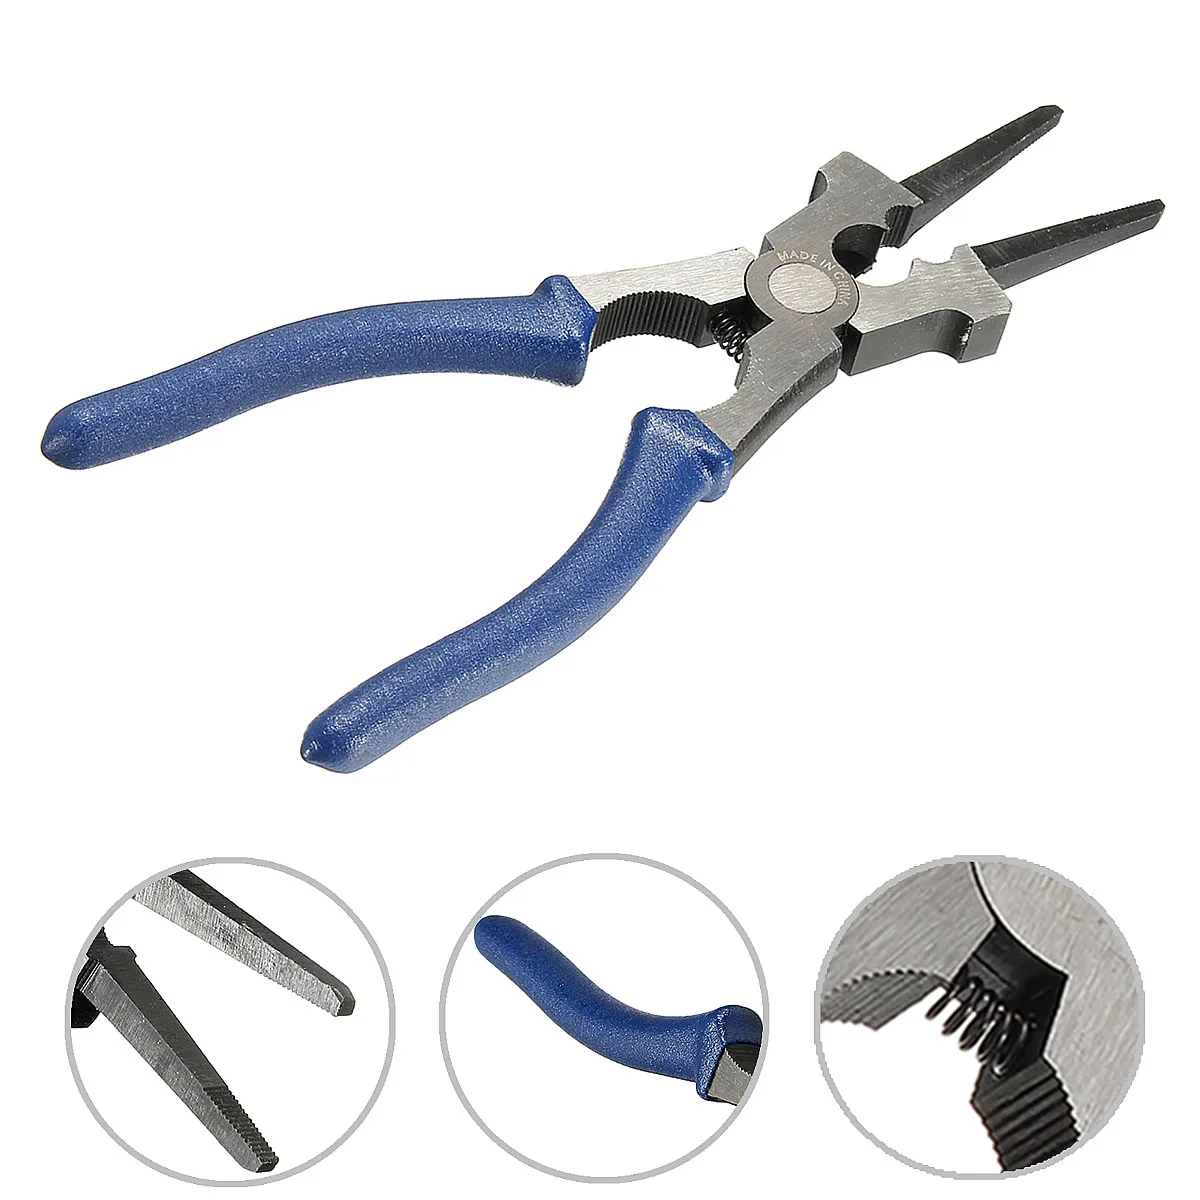 

Flat Mouth MIG Welding Pliers Insulated Handle Carbon Steel for Welding Torch Mig Wire Cutting Multipurpose Tools Spring Loaded